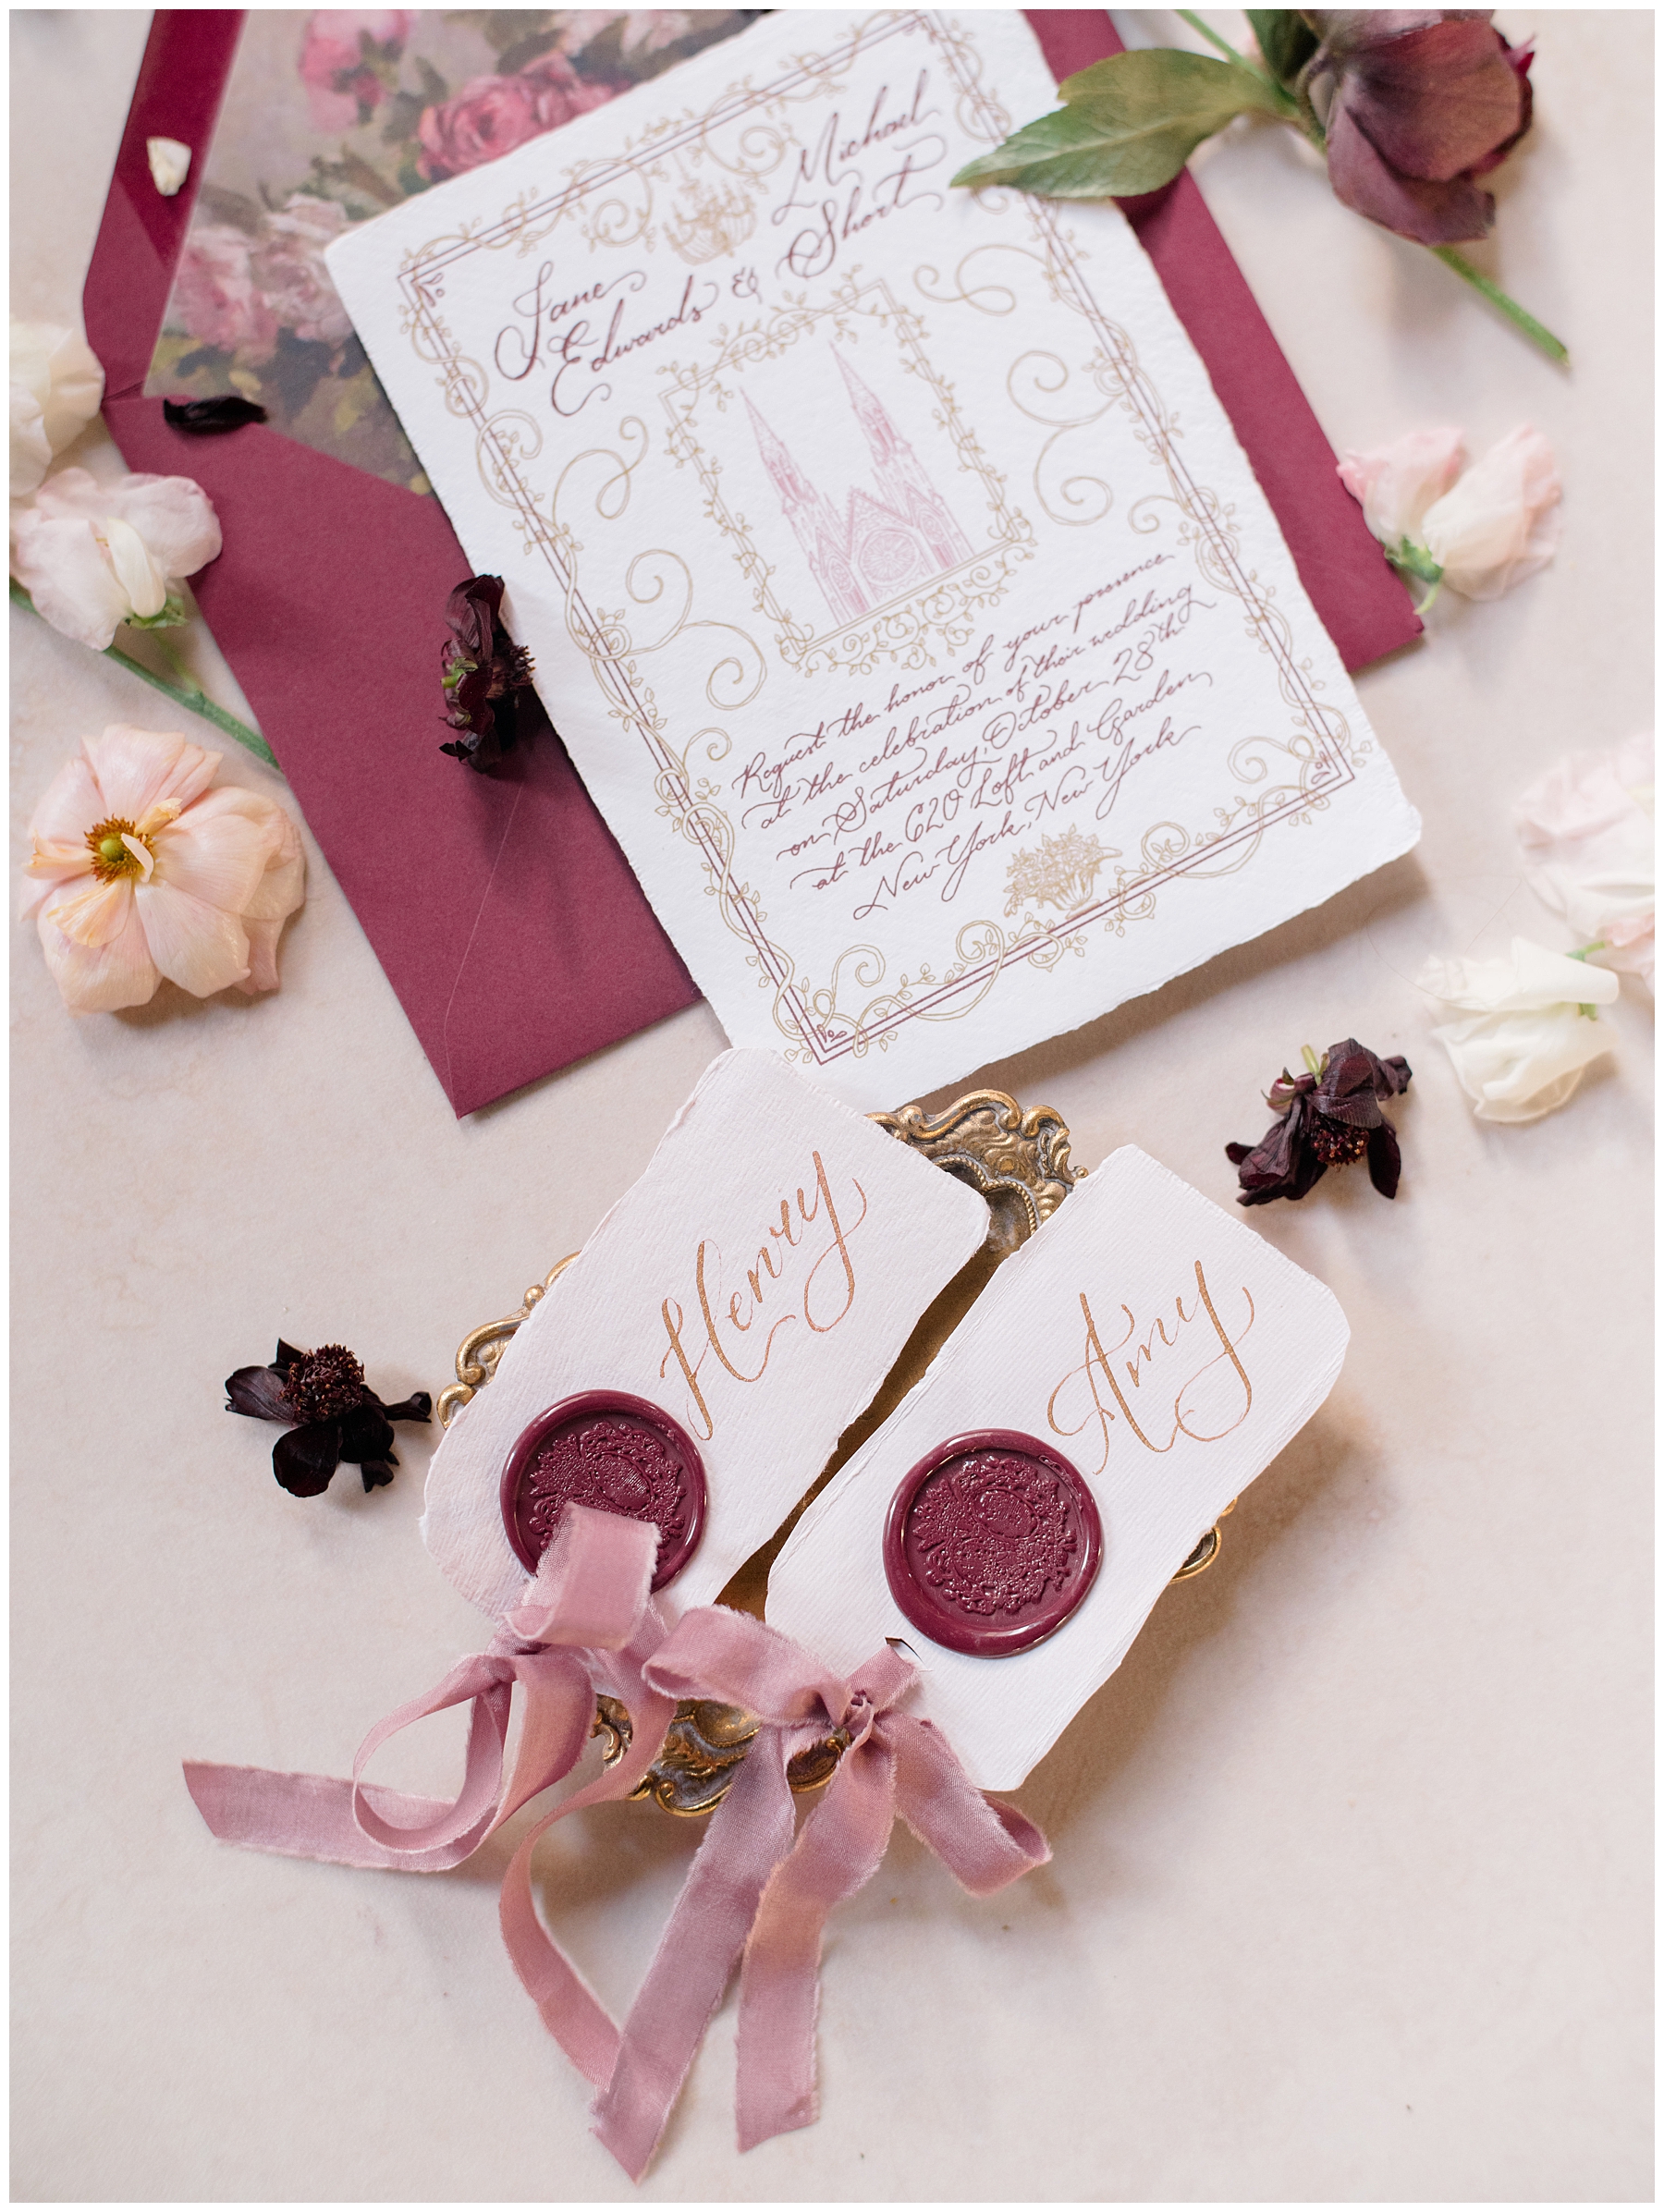 620 Loft and Garden Wedding invitations and details